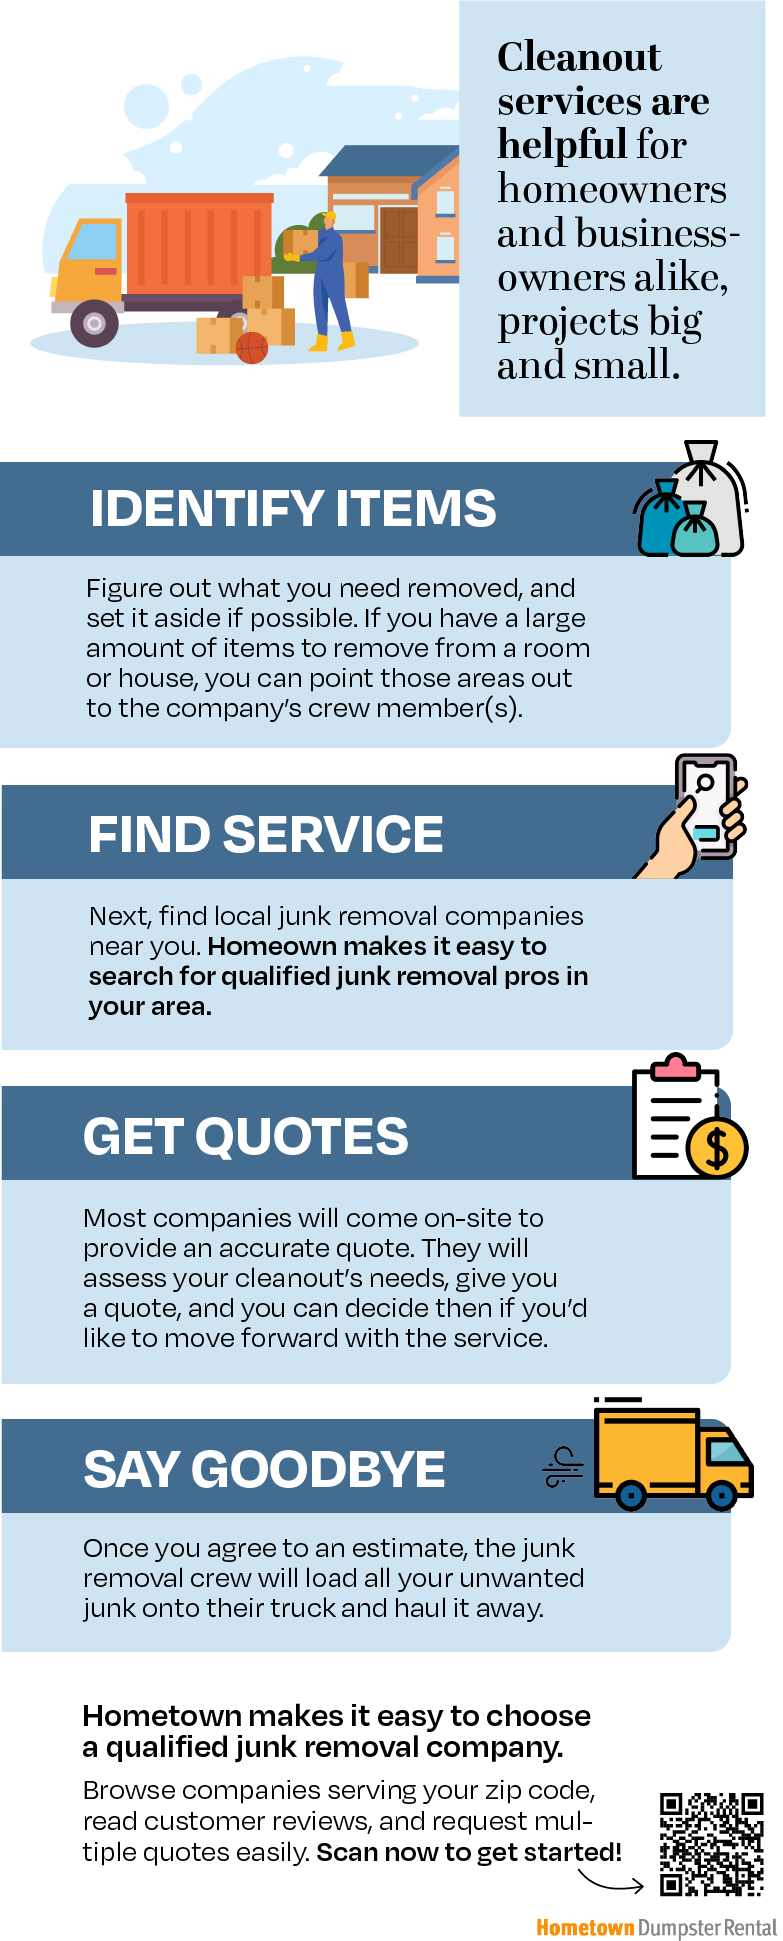 how cleanout services work infographic